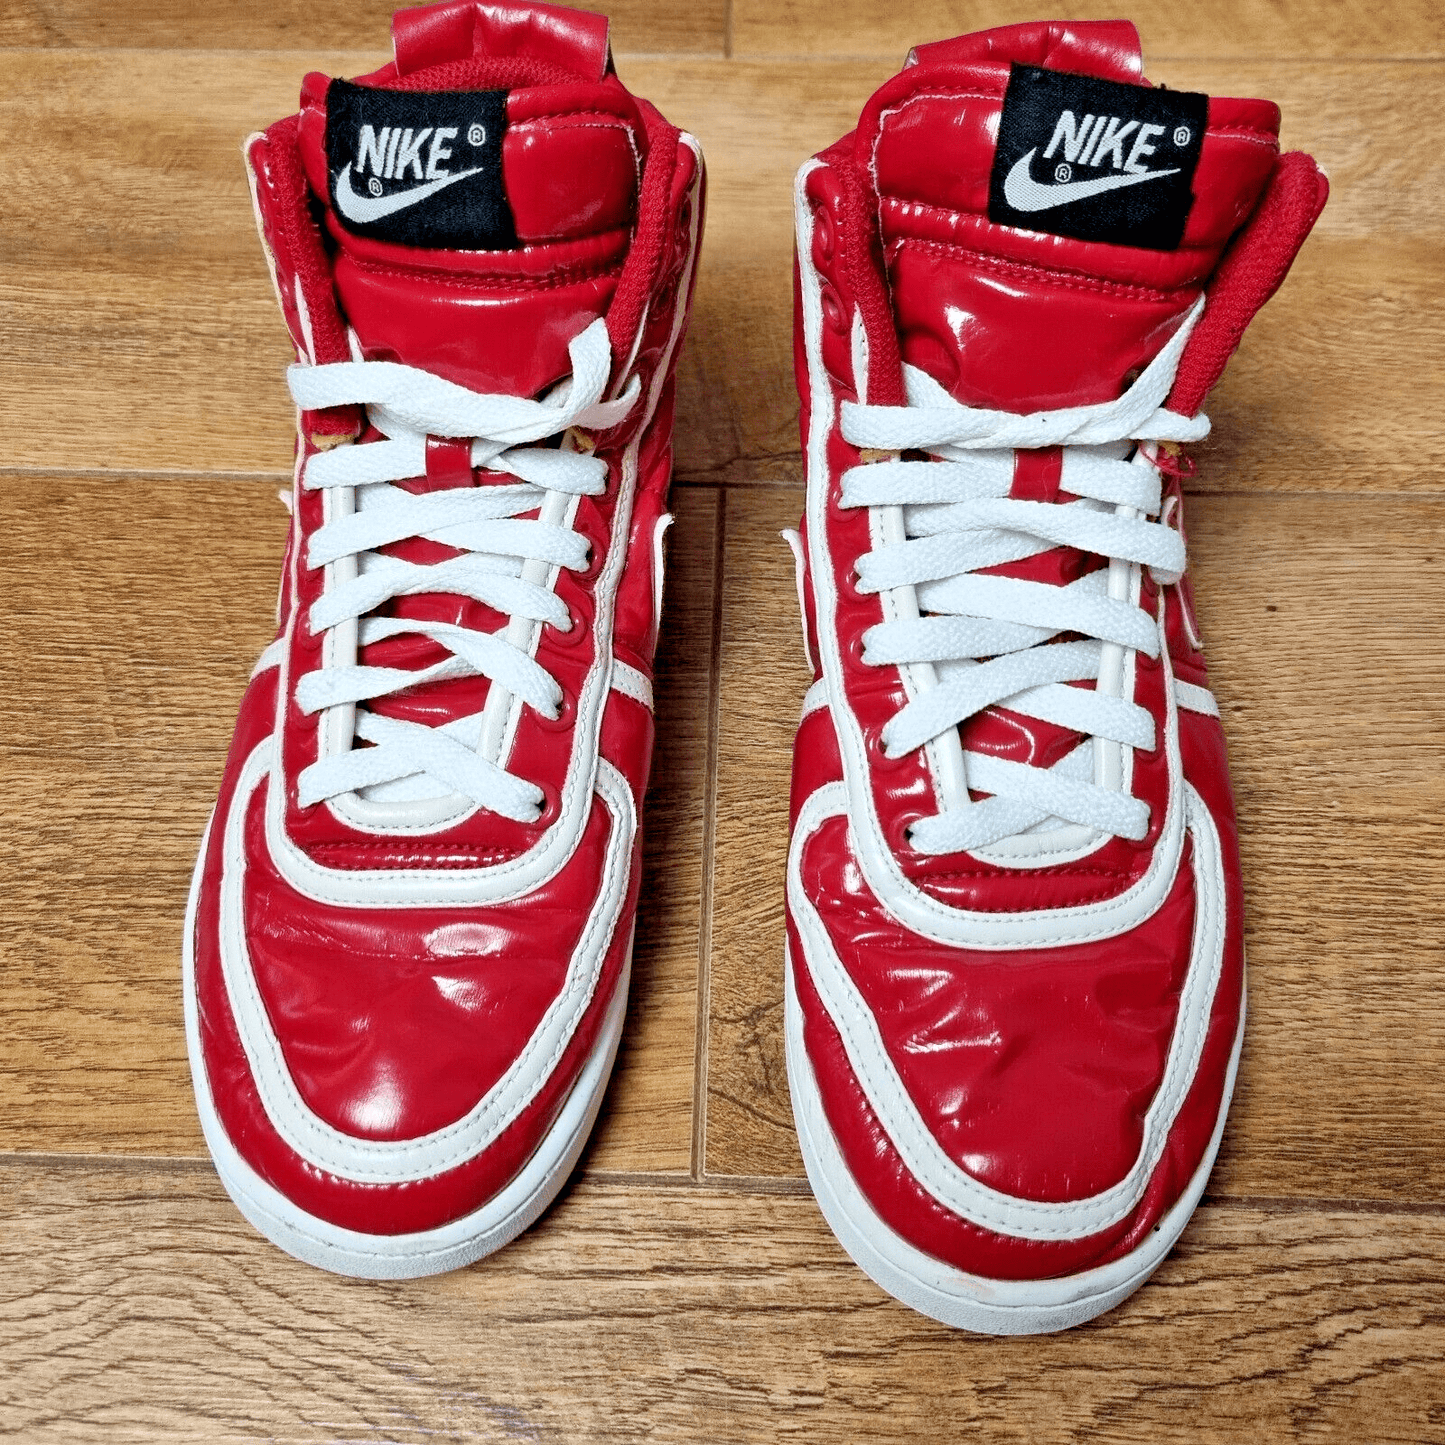 Nike Dunk High Shiny Red Women's Shoes Trainers